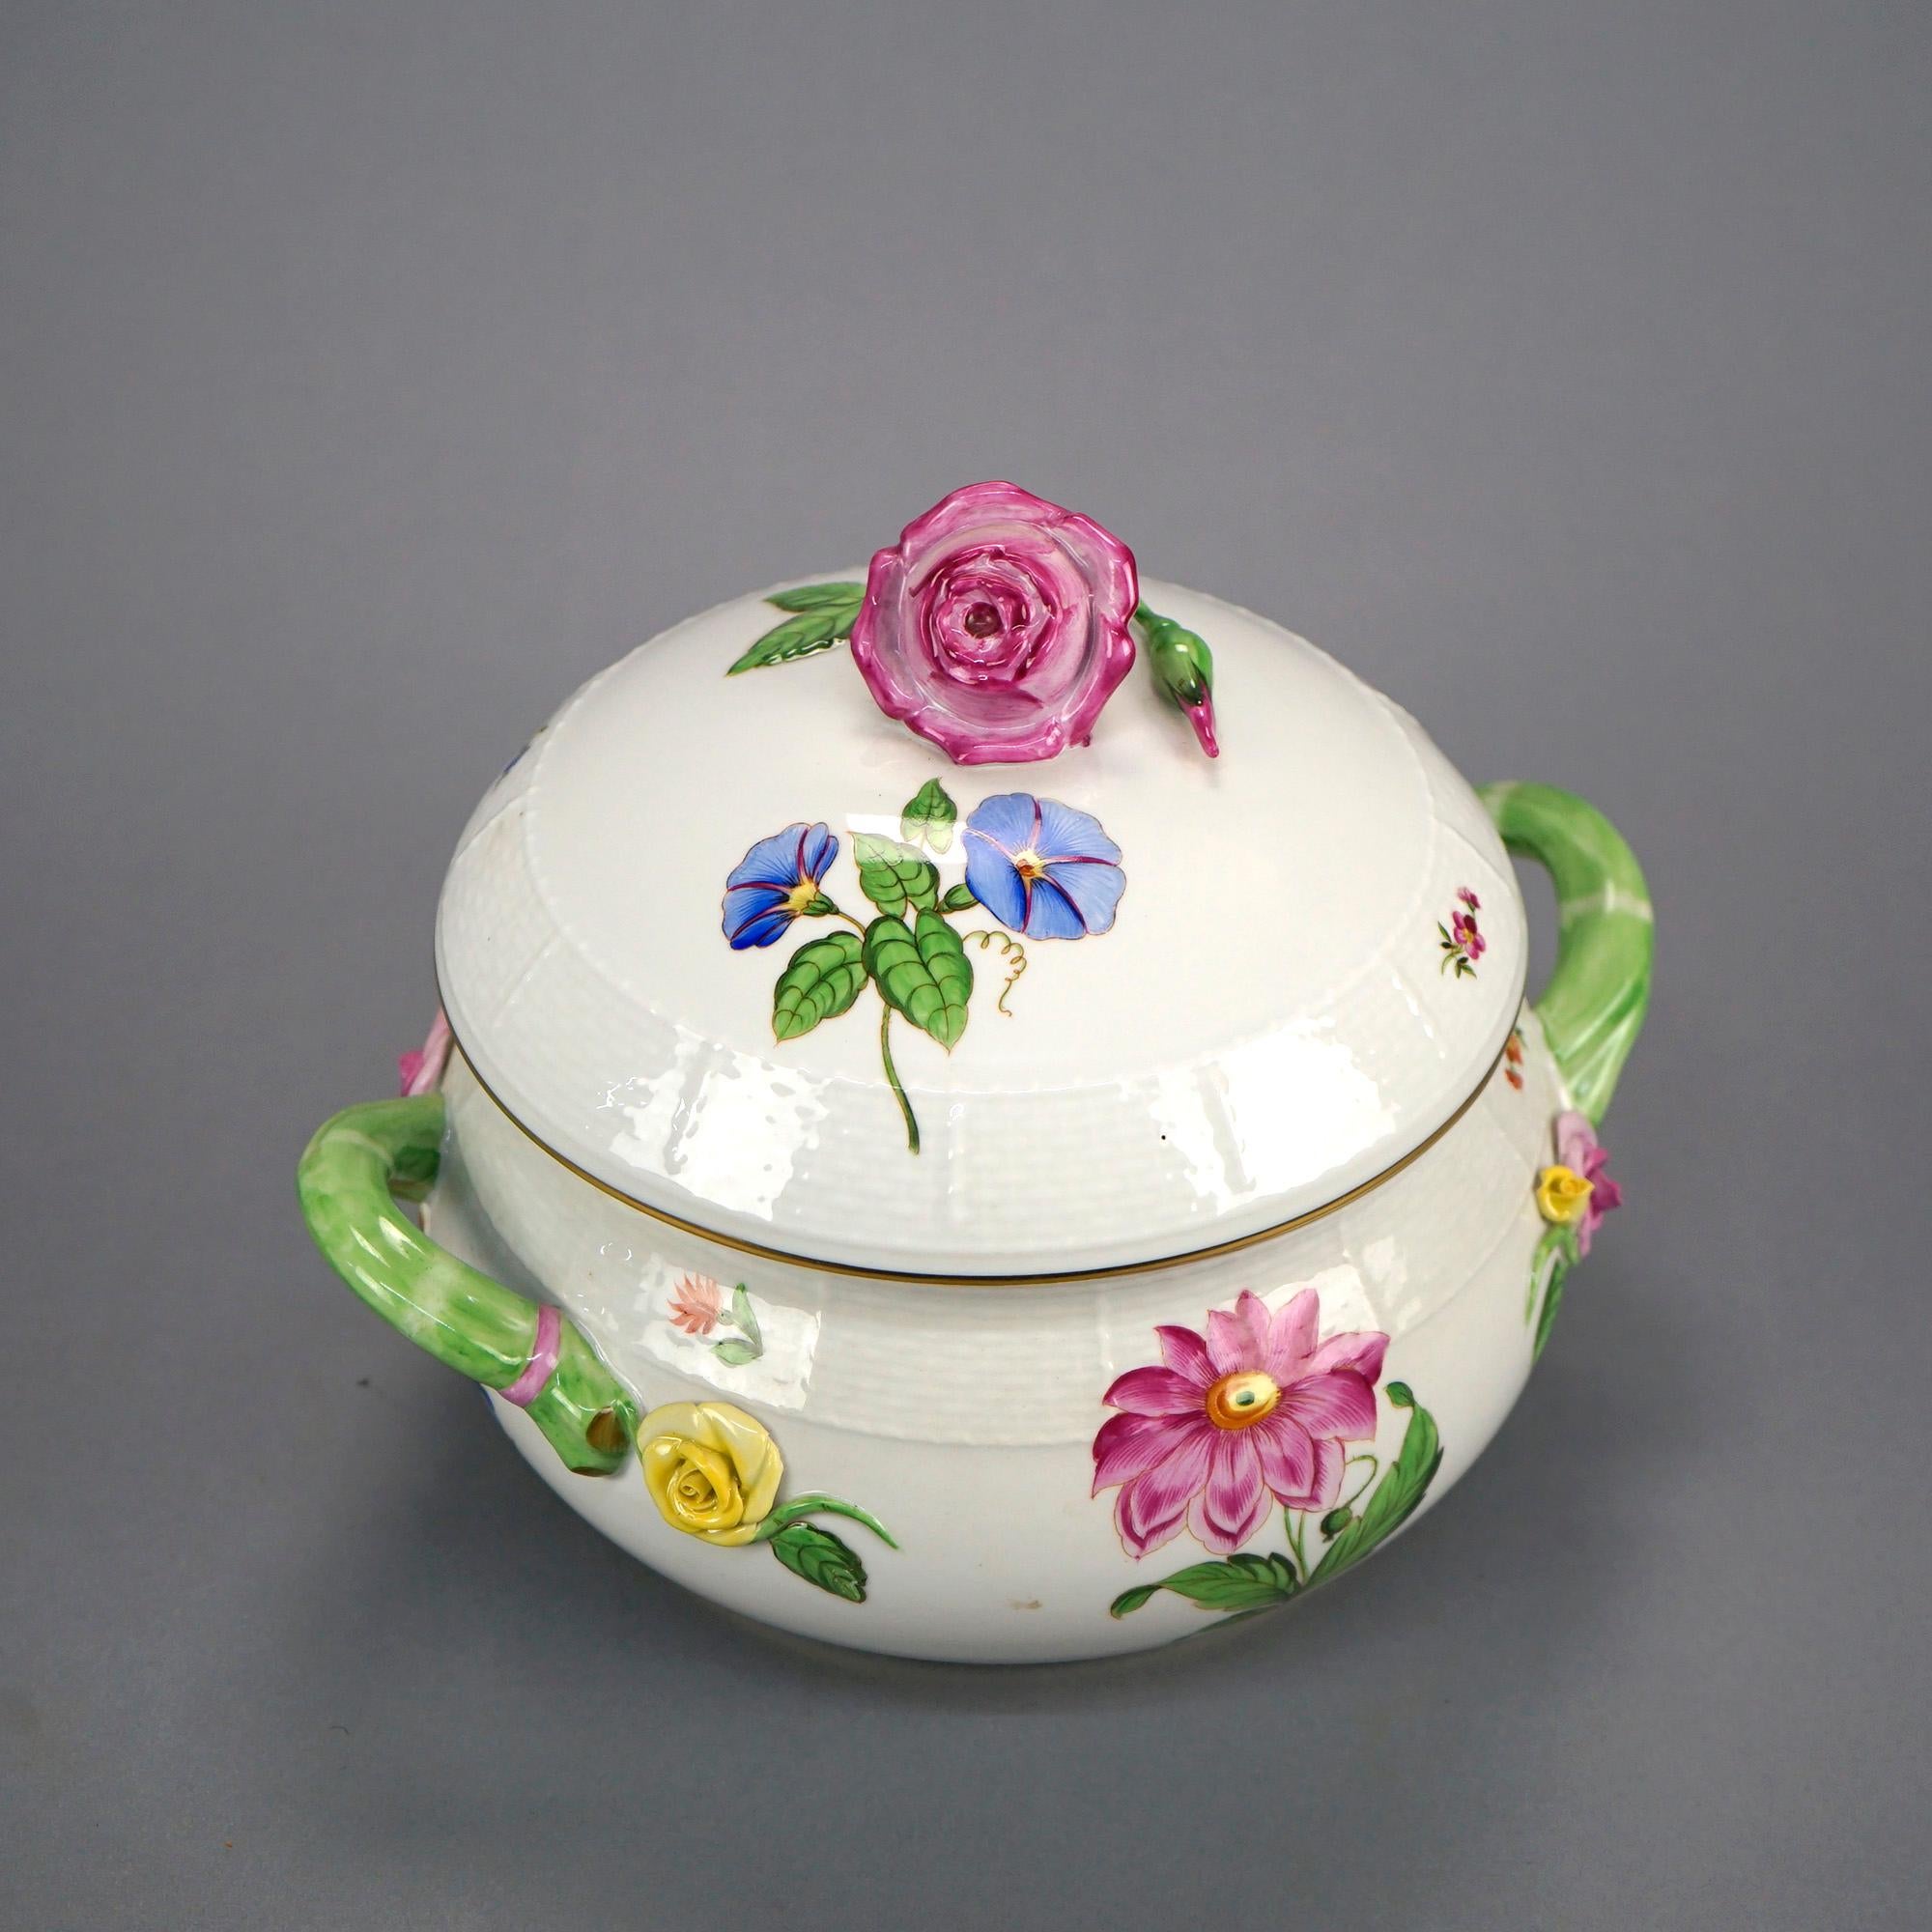 A double handled lidded tureen by Herend offers porcelain construction with hand painted and applied flowers throughout, gilt highlights, maker mark on base as photographed, 20th C

Measures- 8'' H x 10.5'' W x 8.5'' D.